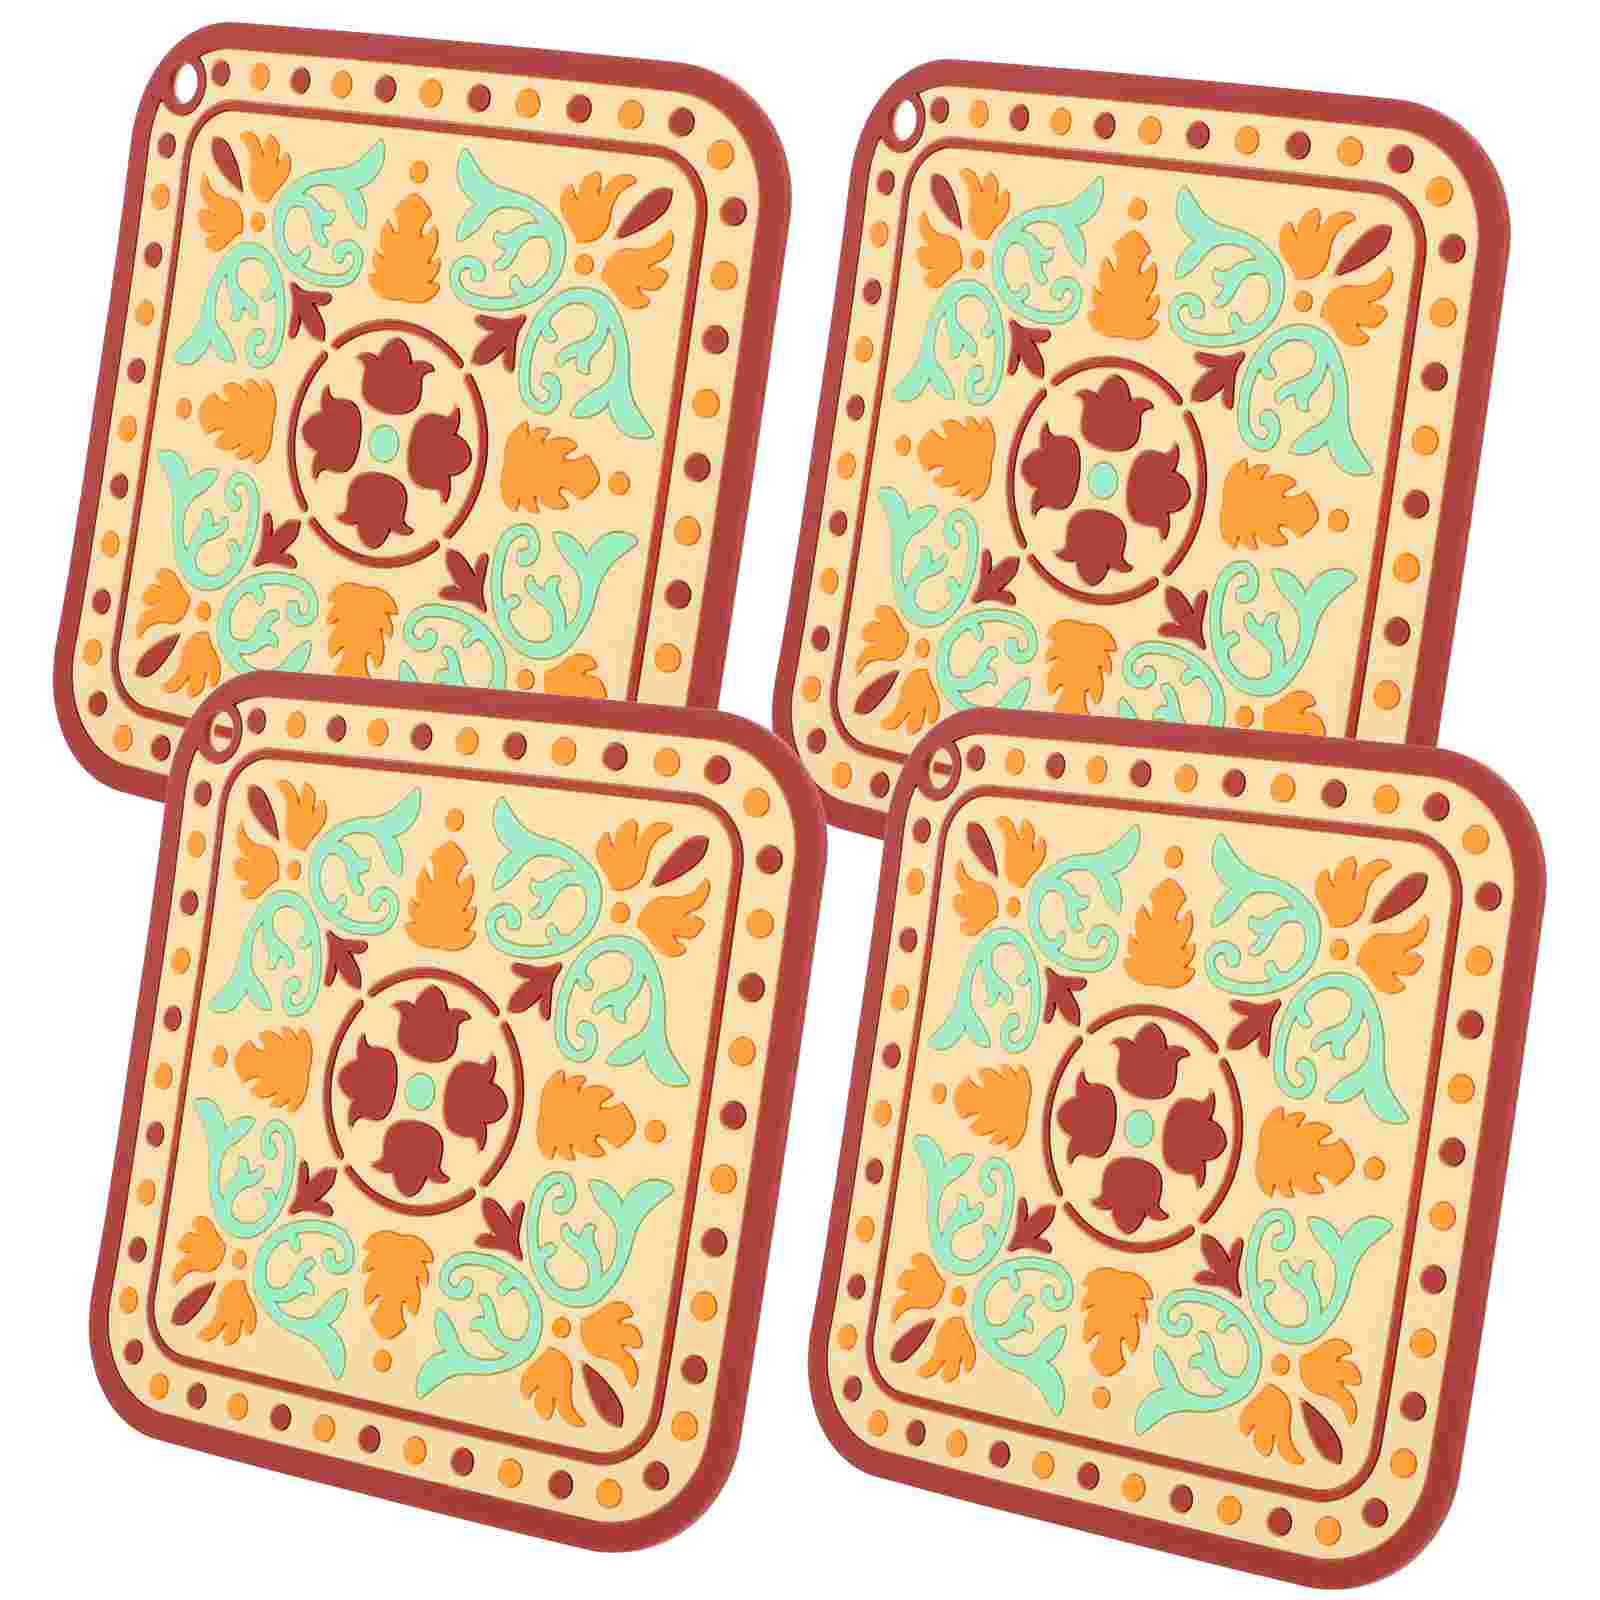 

Placemats Table Mats Pvc Decorative Floral Resistant Heat Dinner Dish Dining Placemat Vinyl Coasters Mandala Square Wipeable